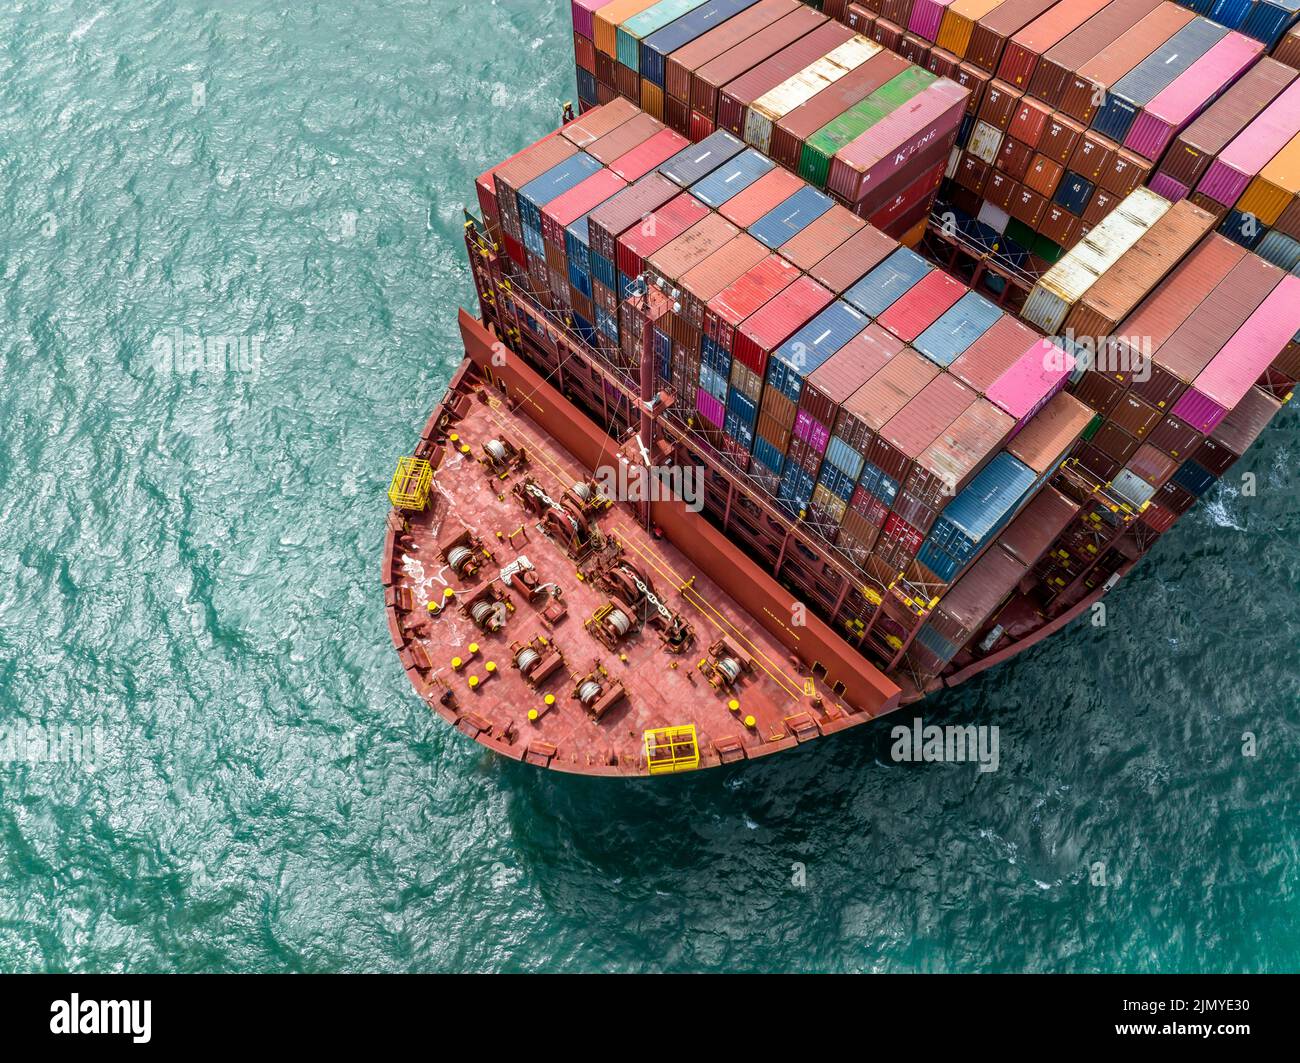 Huge Container Ship at Sea Transporting Goods and Cargo to International Ports Stock Photo